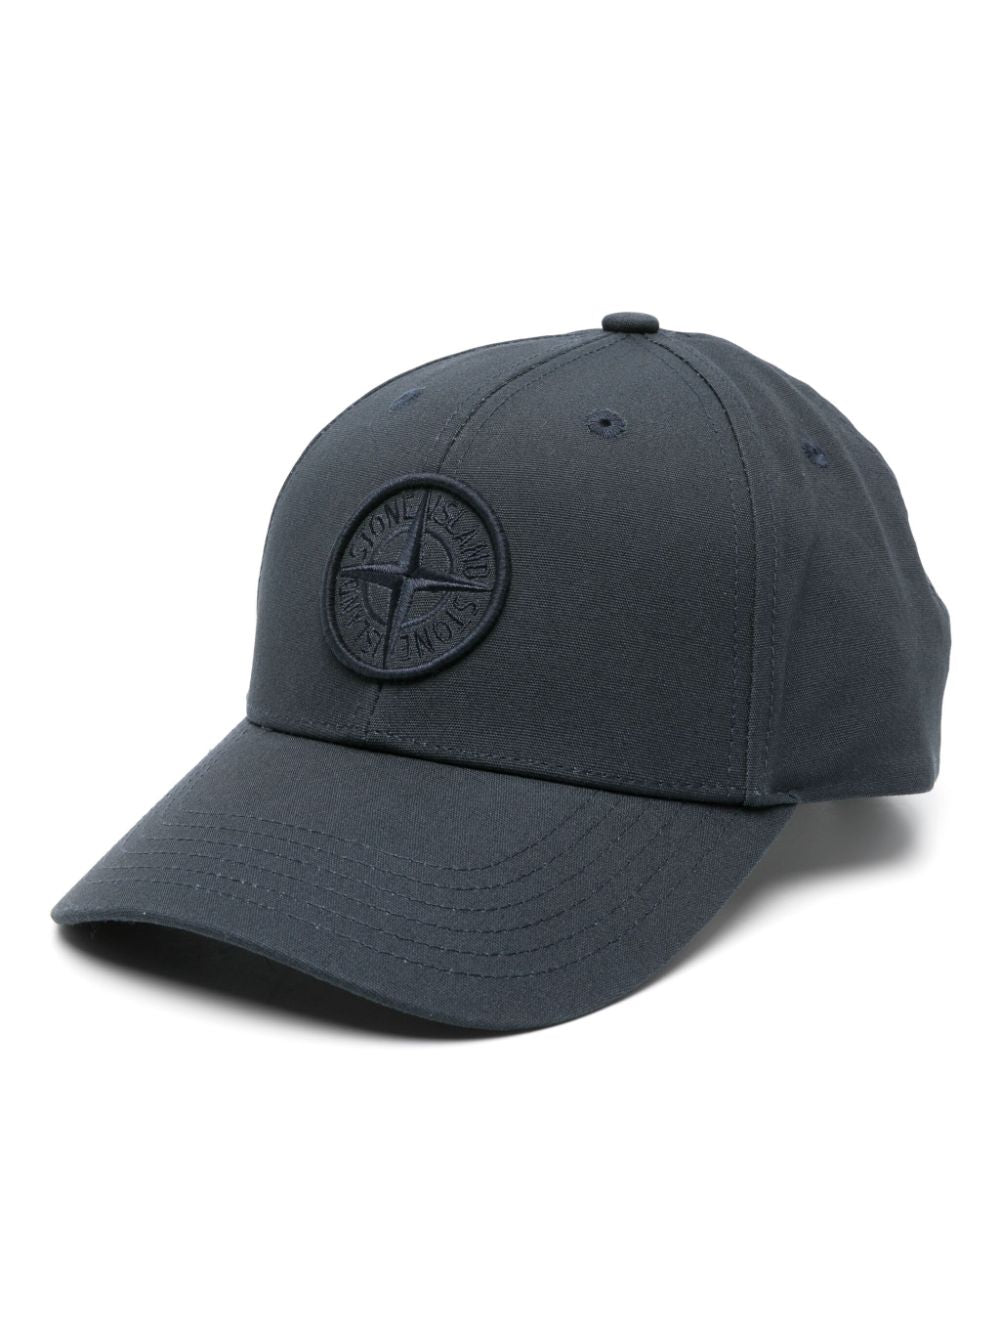 Stone Island - Casquette navy 99661 - Lothaire